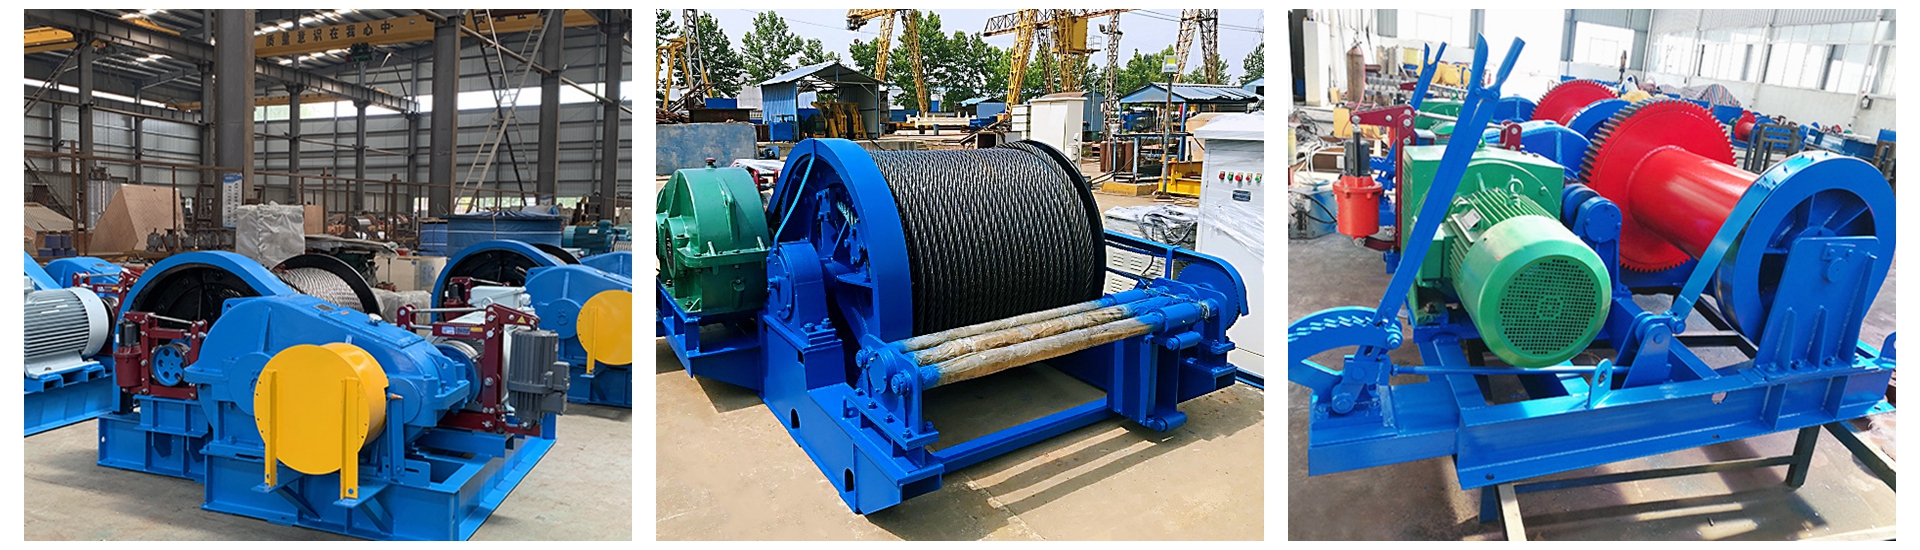 electric winch